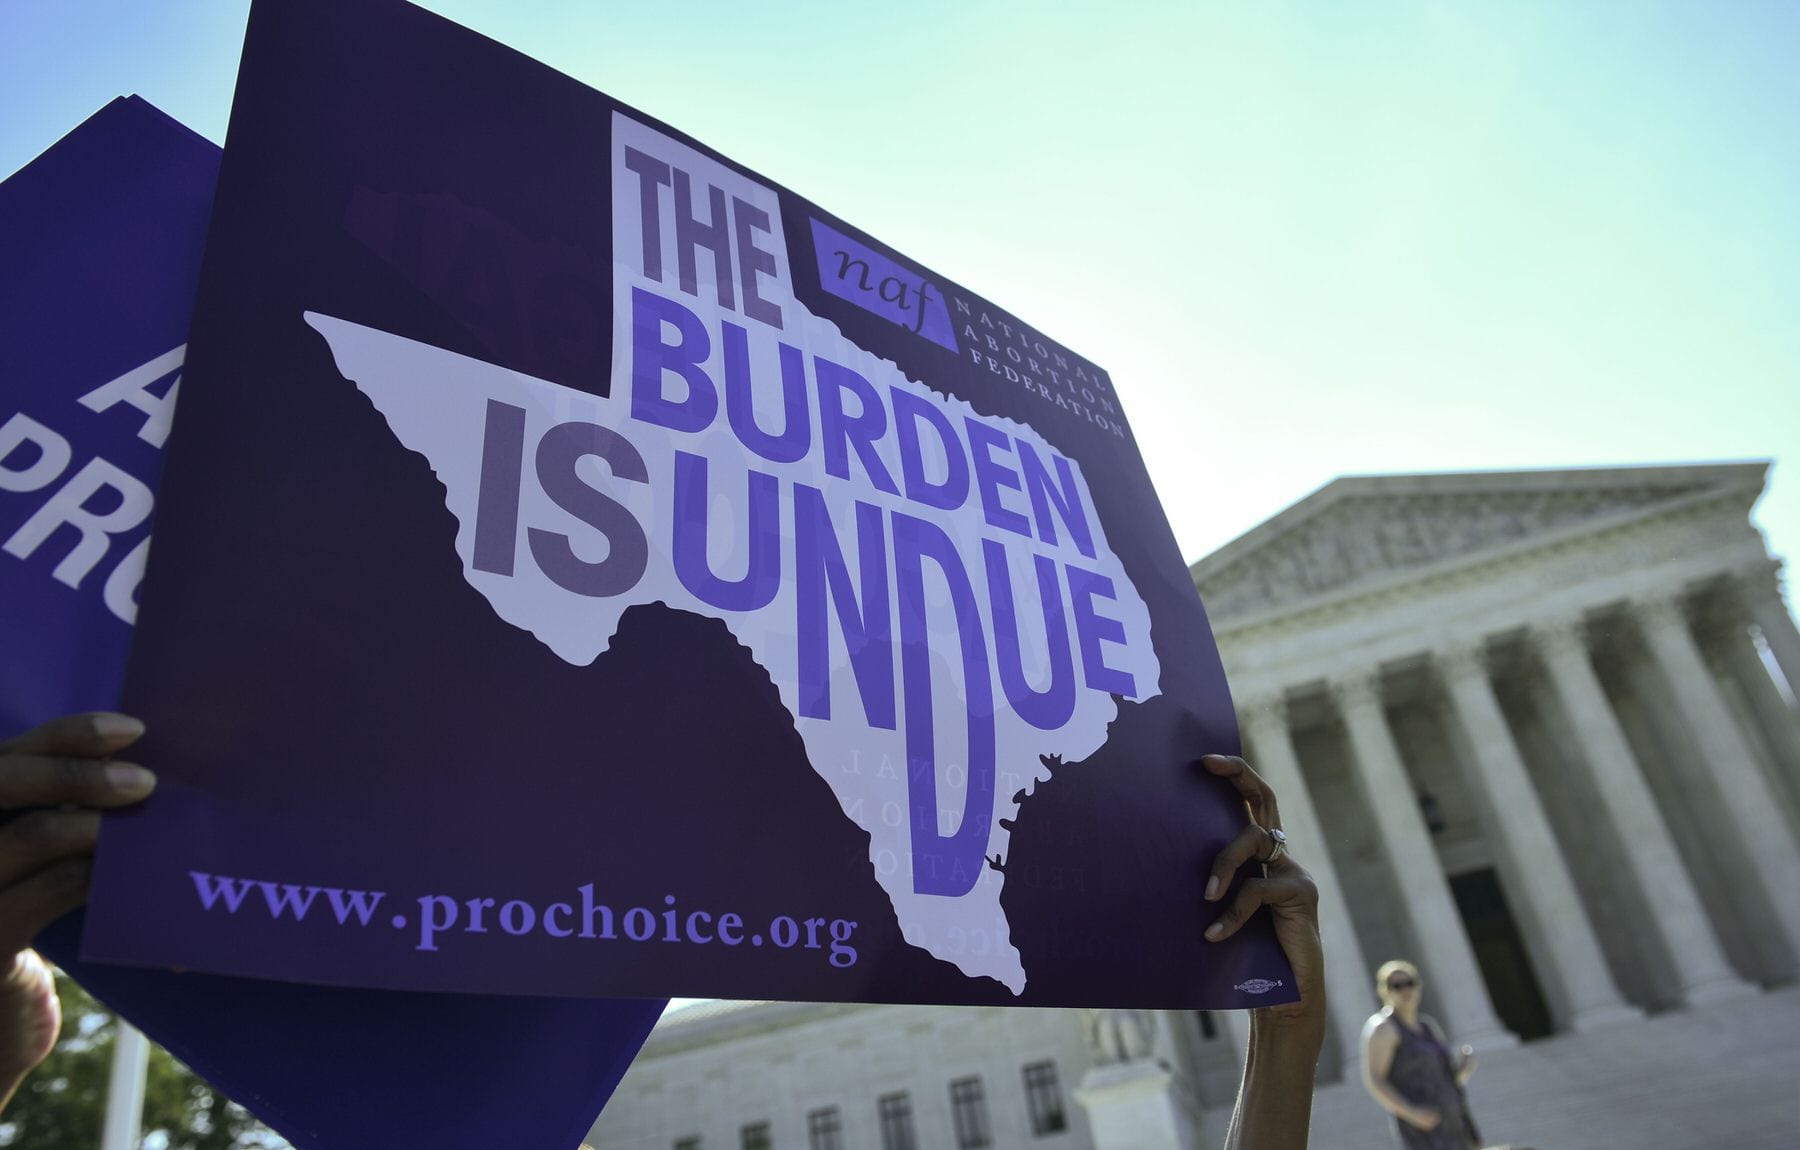 A sign that reads "The burden is undue" inside of the outline of Texas.